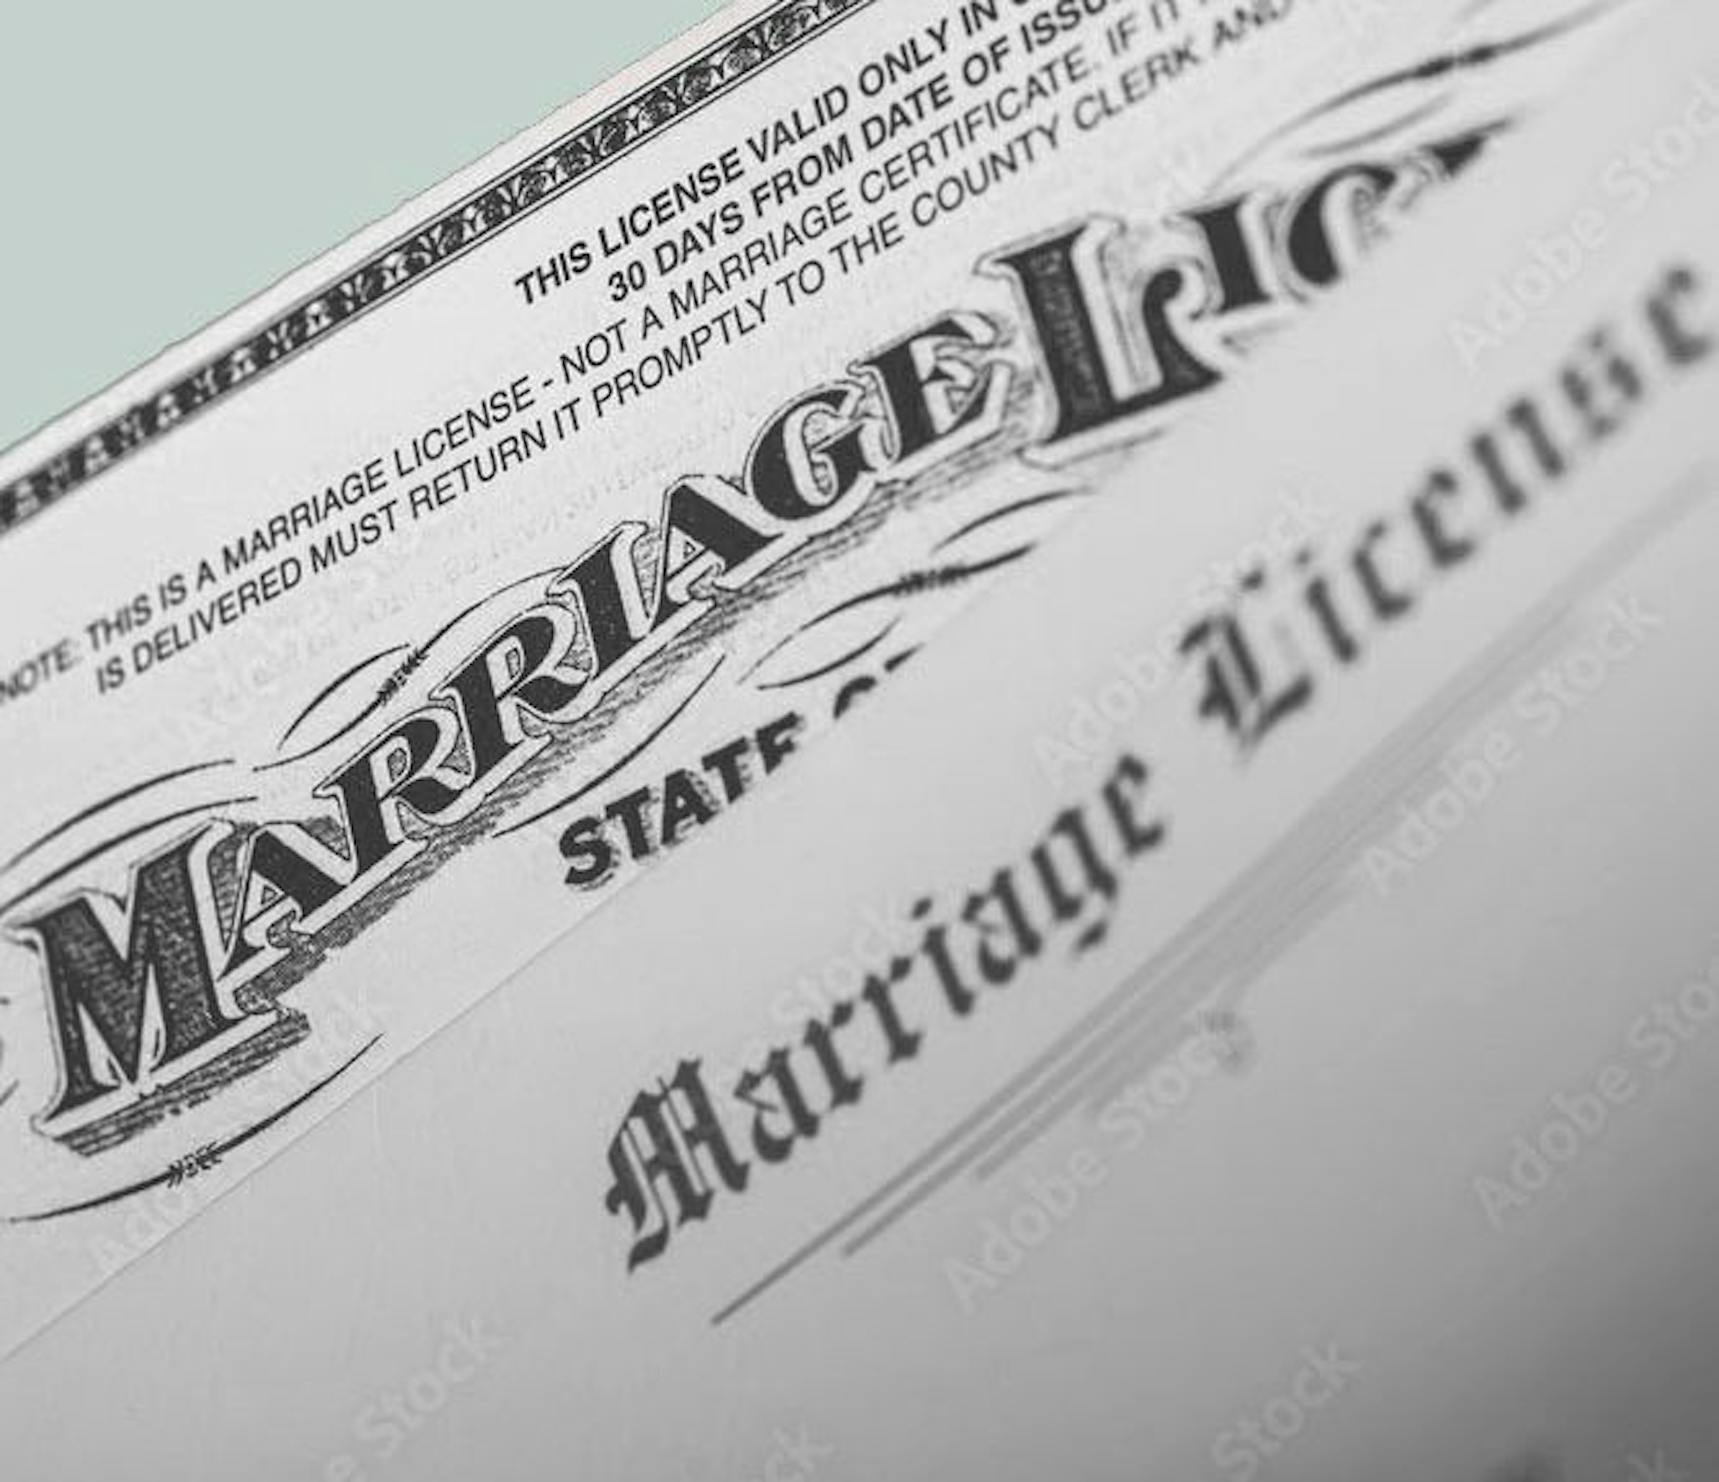 Picture of a marriage license